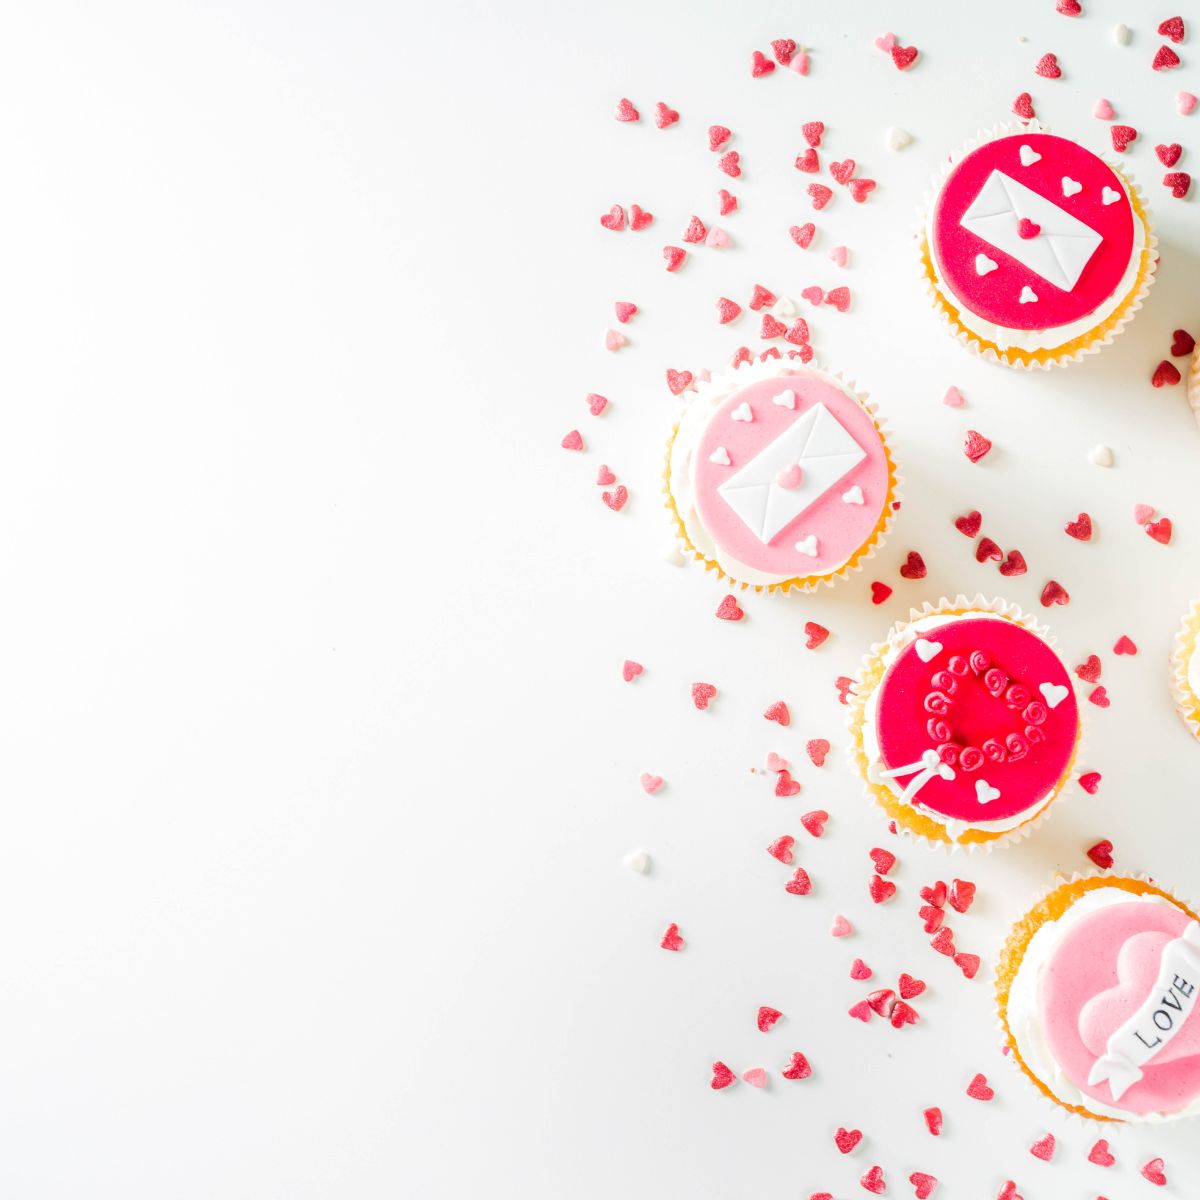 White background with valentine's day decorated cupcakes and heart shaped sprinkles scattered